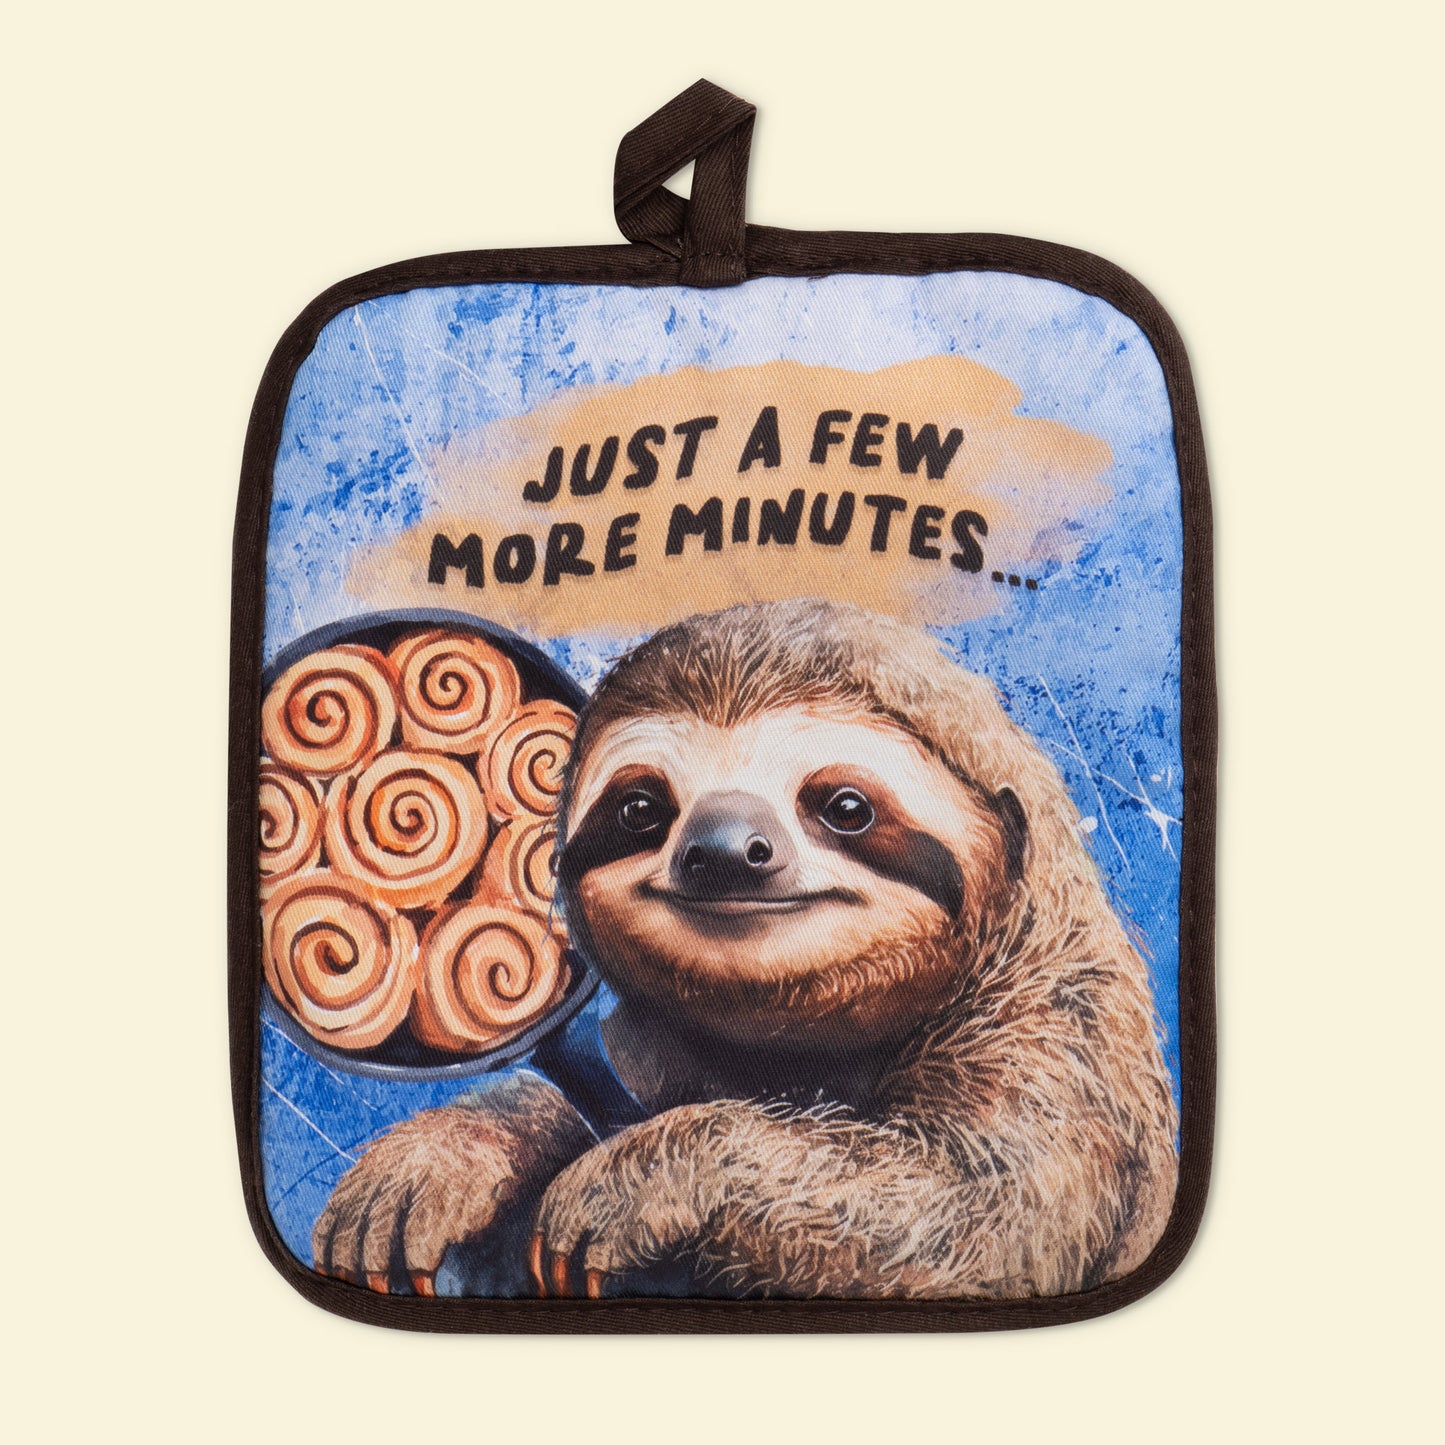 Sloth Just A Few More Minutes Oven Potholder funny